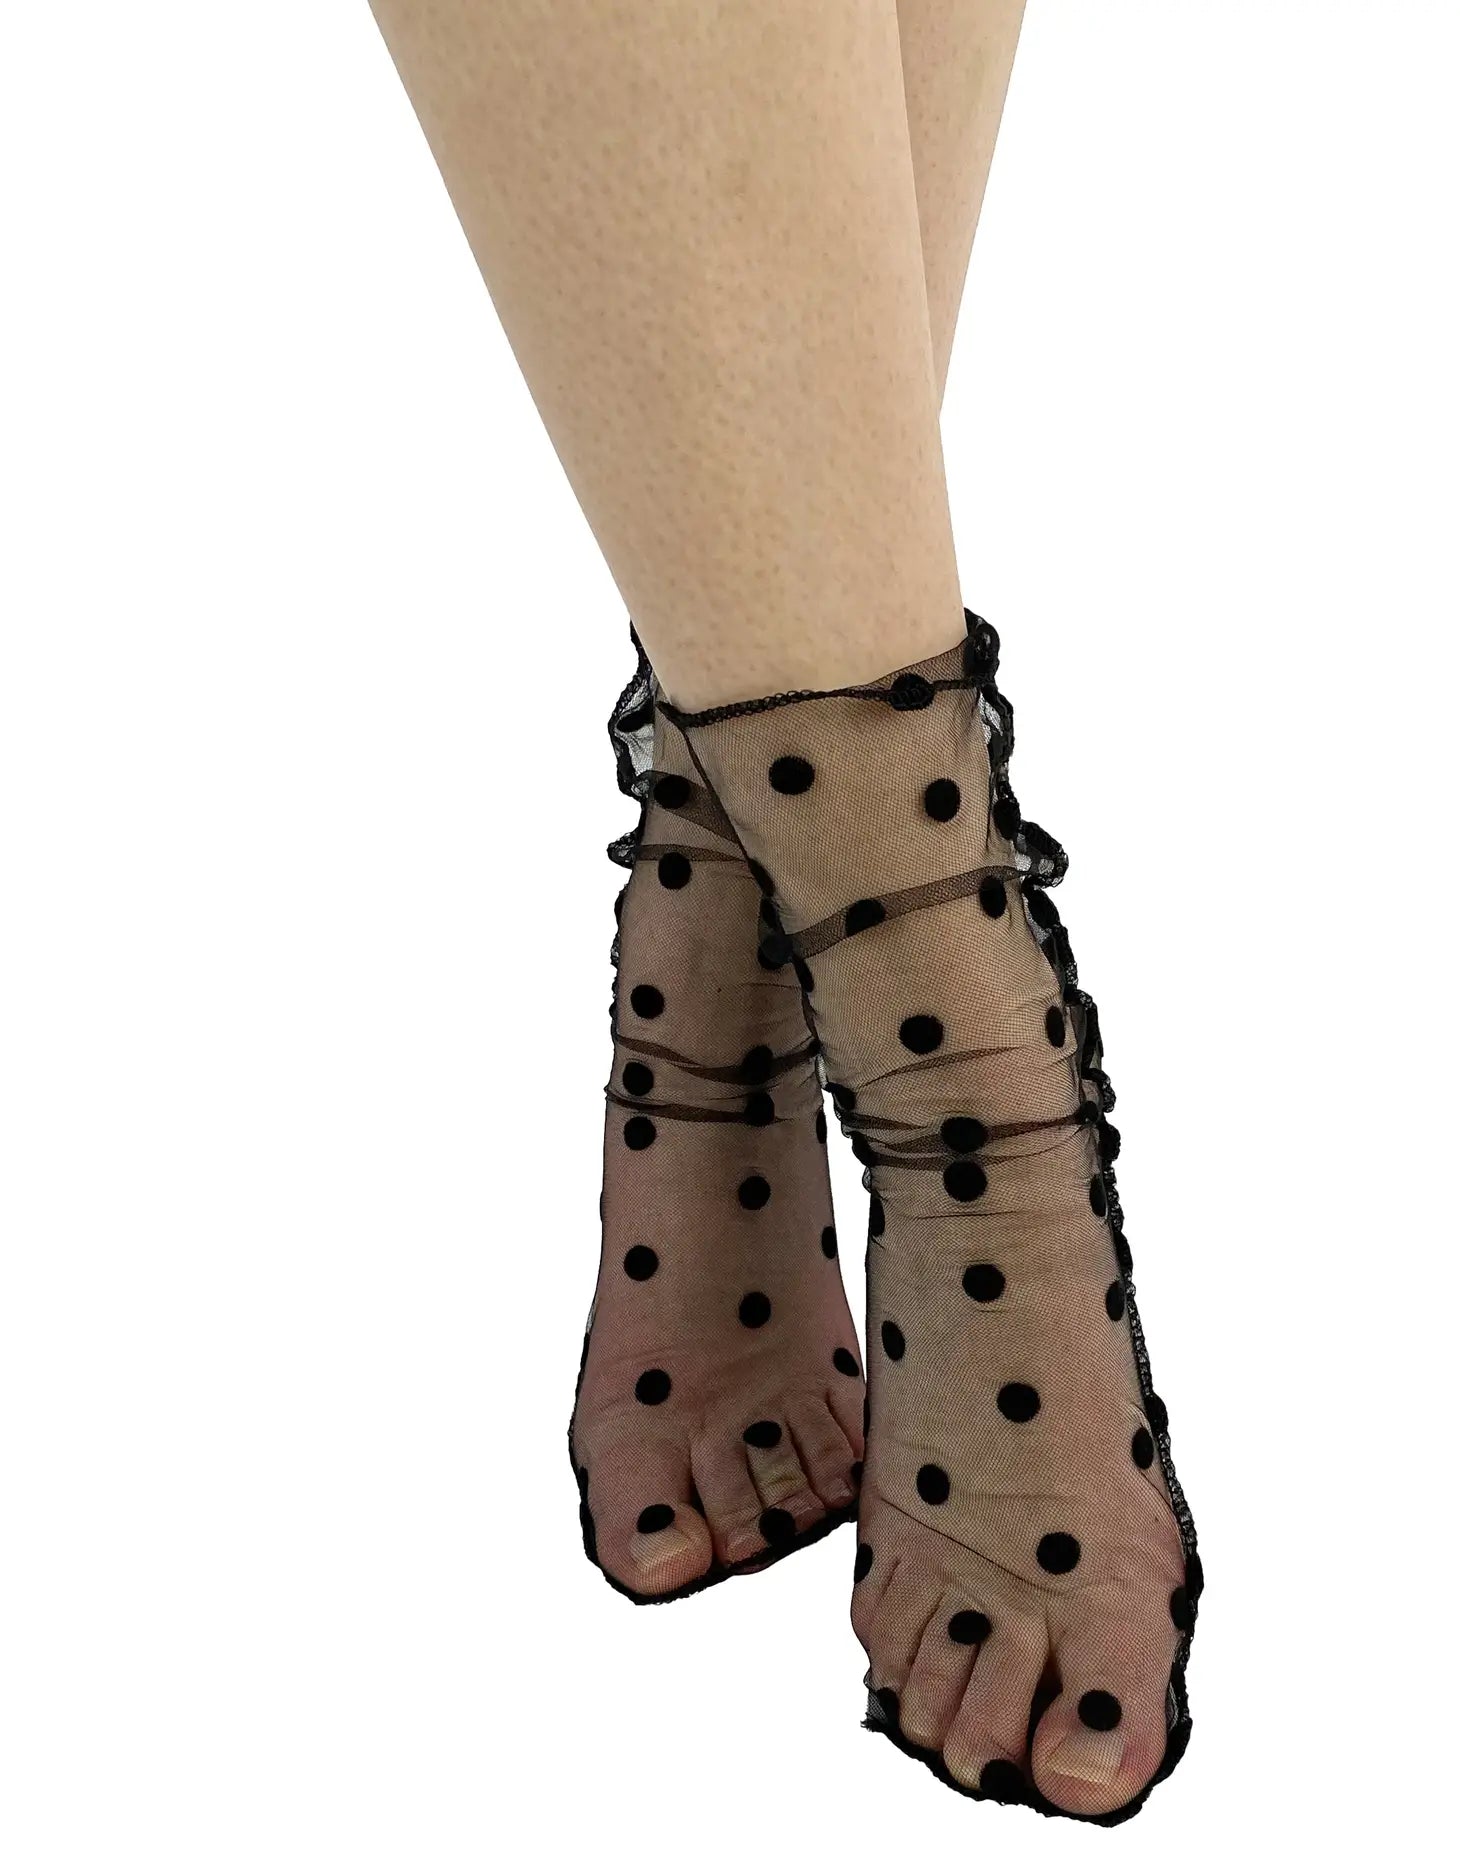 Black tulle slouchy ankle socks with a classic black flocked dot pattern. Shown on a model without shoes